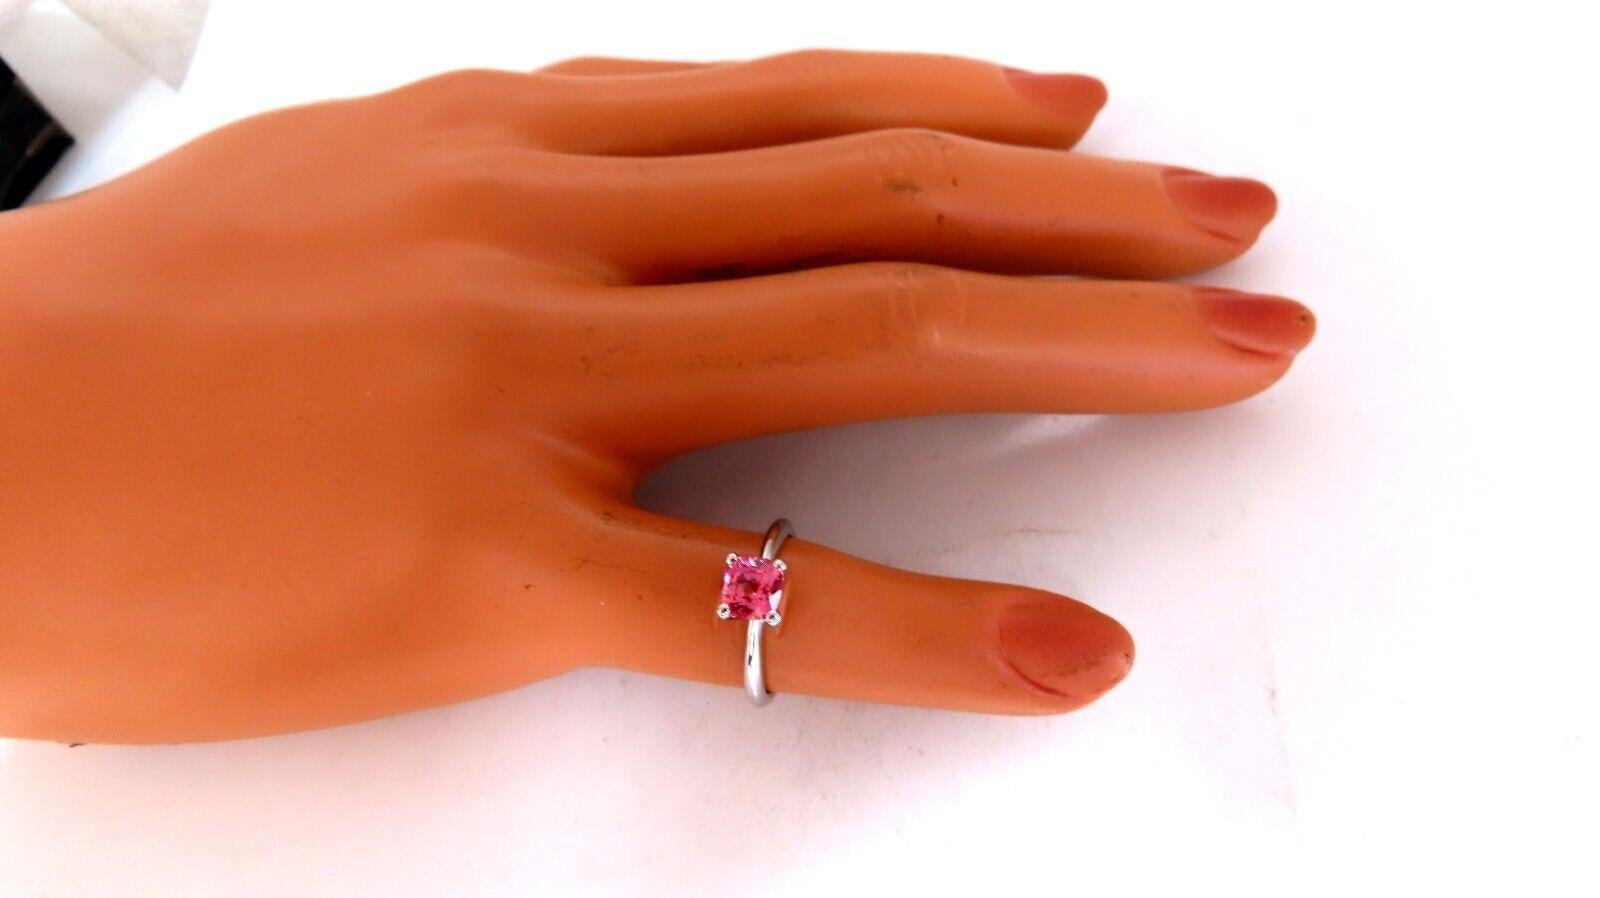 1.11ct. Natural Padparadscha Sapphire ring.

Cushion cut: 5.56 X 5.52  X 4.03mm

Transparent, Pink & Clean Clarity.

No Heat

Platinum

3.9 grams.

Depth: 5.7mm

current ring size: 4.5

May be resized.

